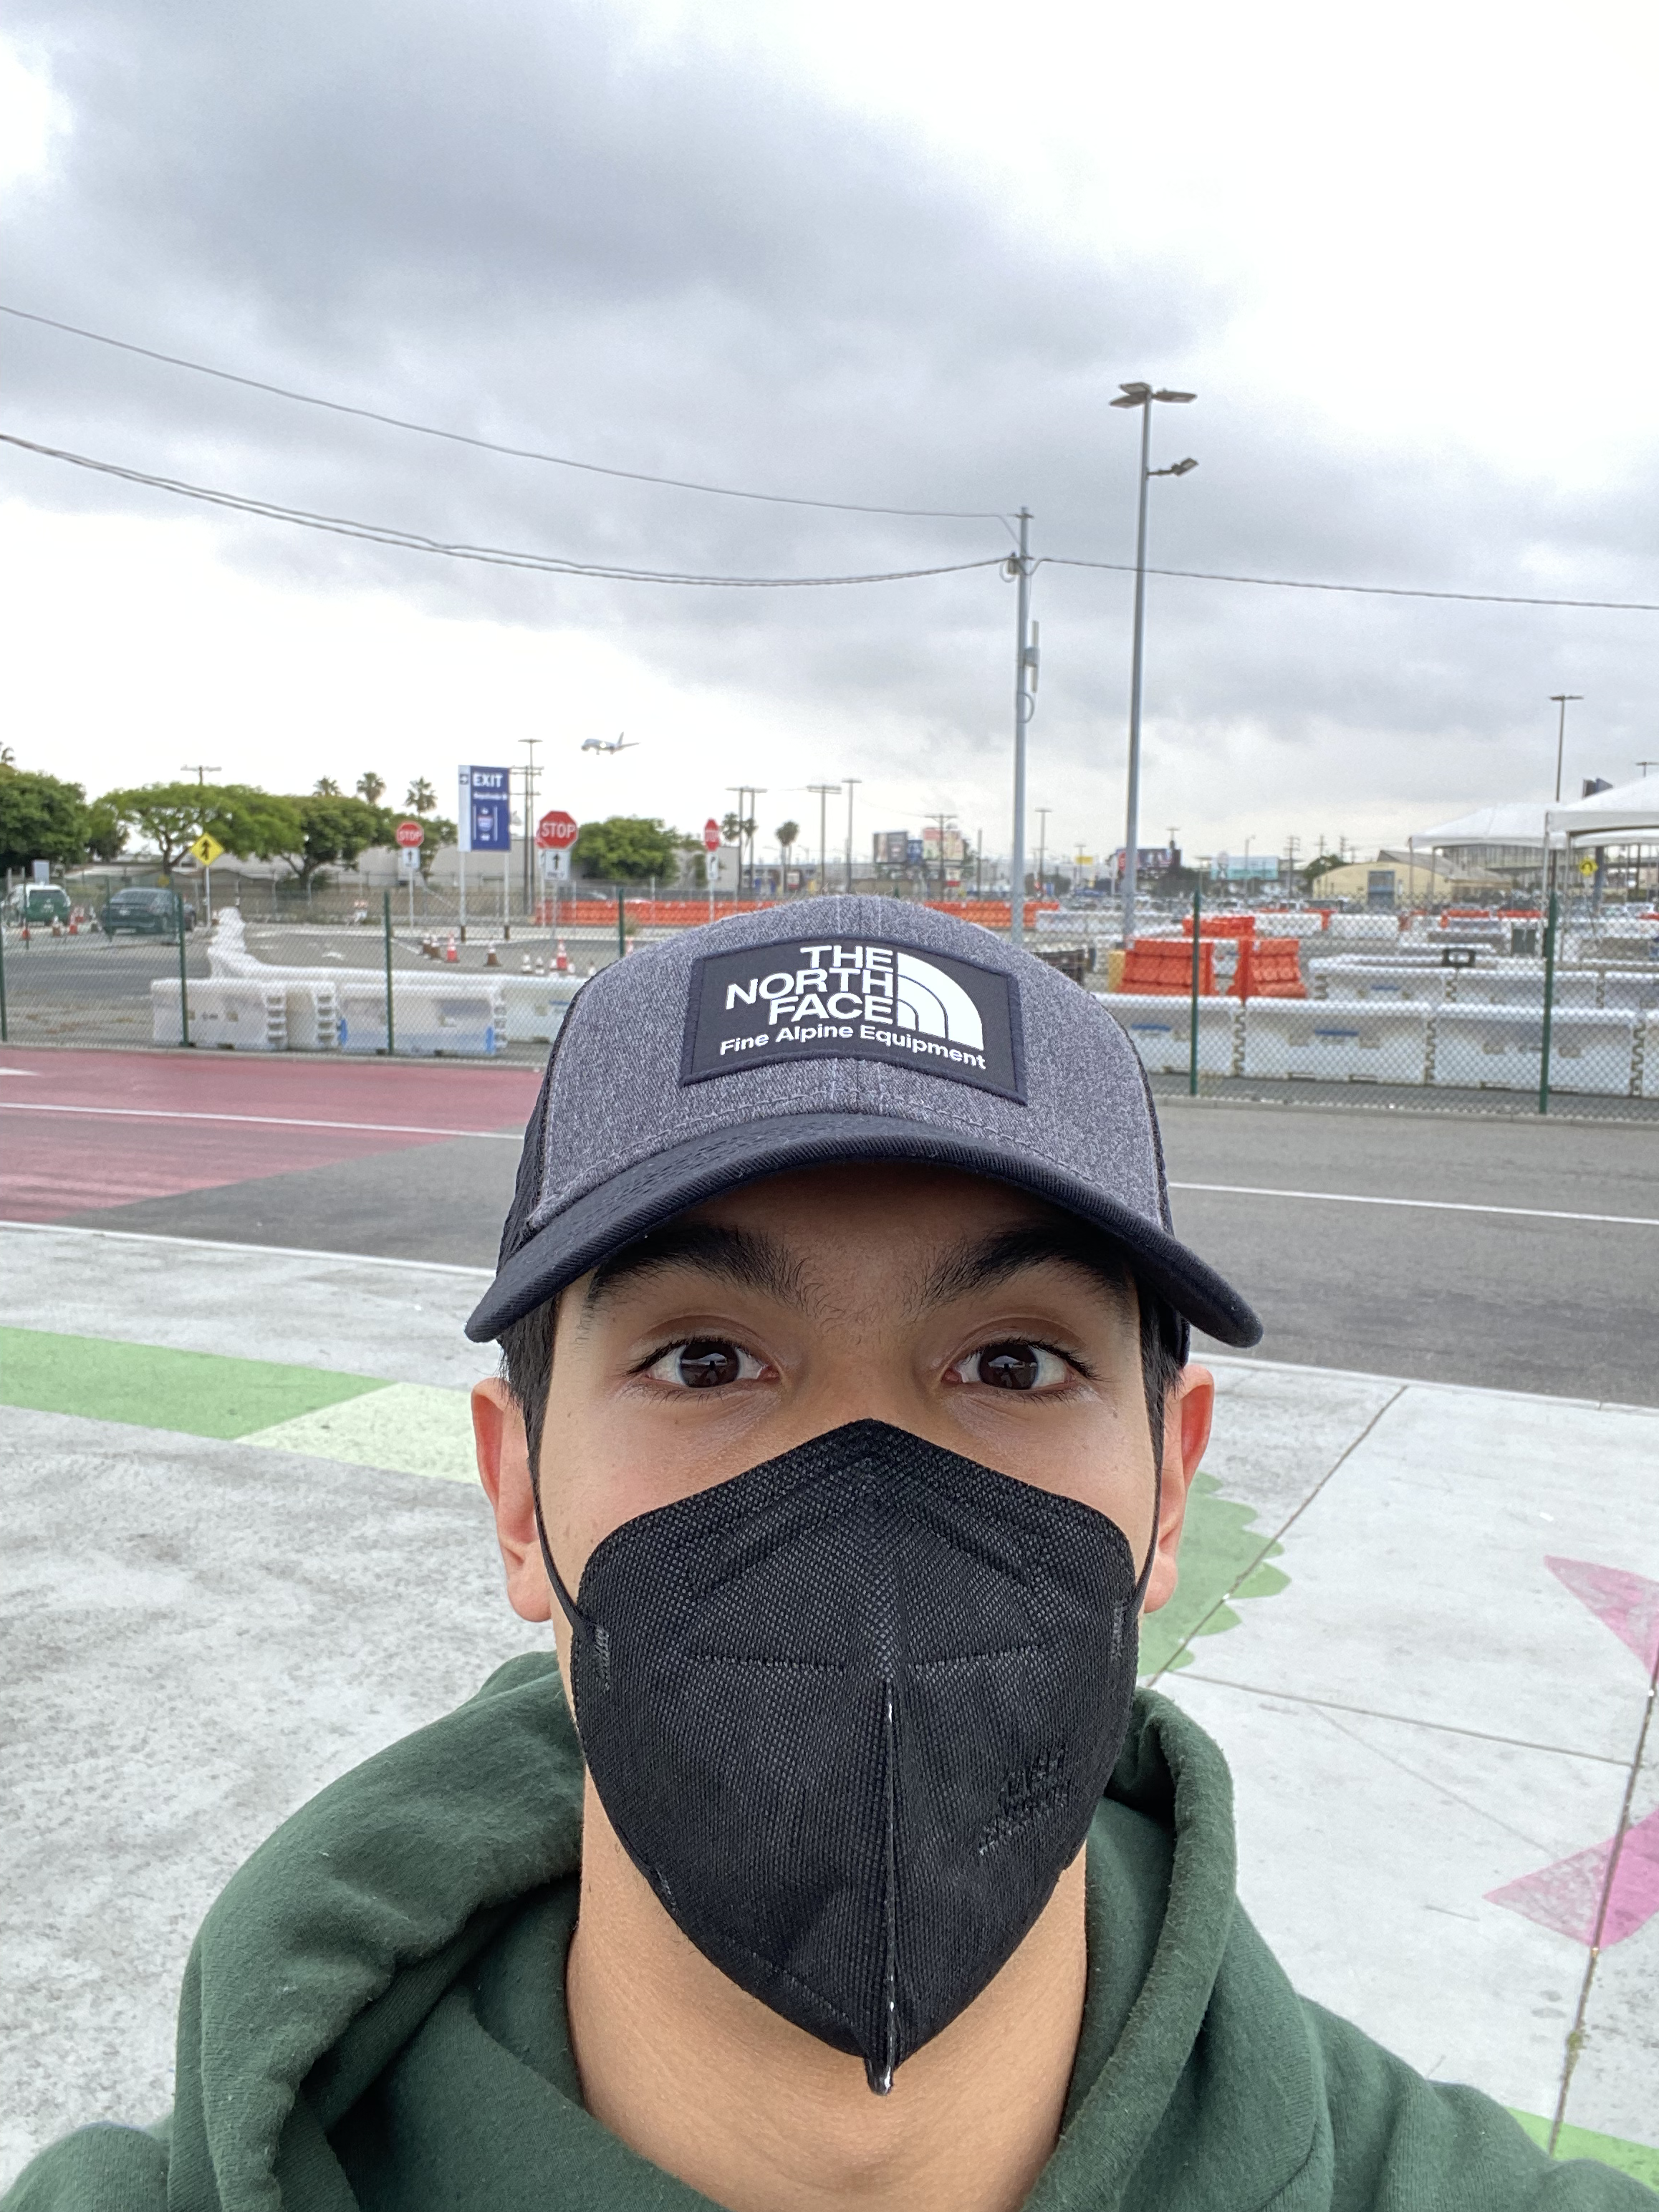 person wearing a black KN95 mask and a baseball cap takes a selfie